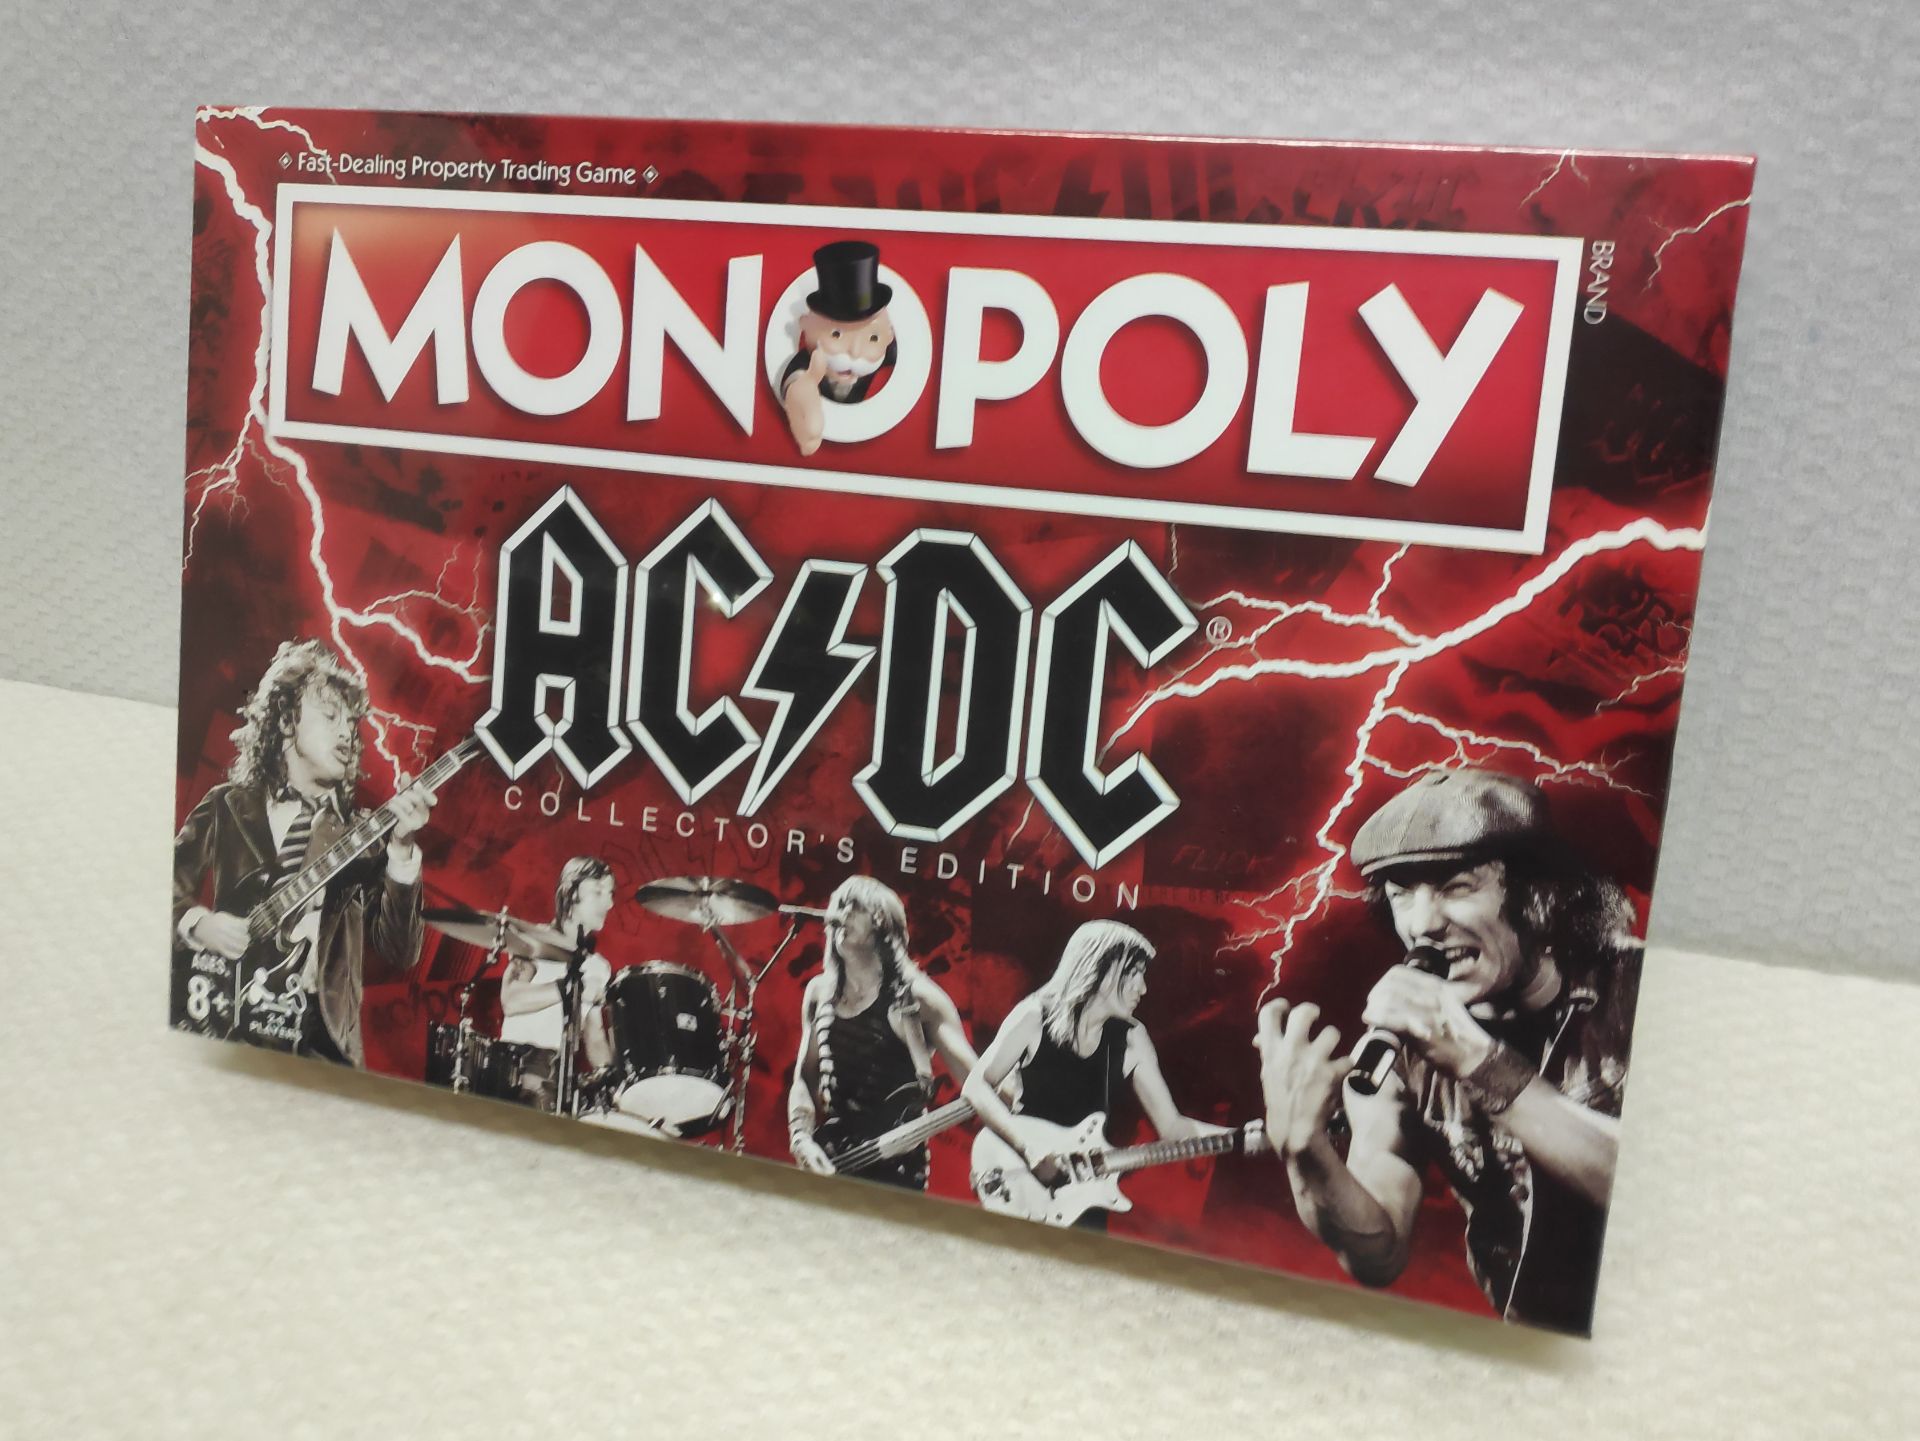 1 x AC/DC Collector's Edition Monopoly - New/Sealed - HTYS169 - CL720 - Location: Altrincham WA14<BR - Image 3 of 8